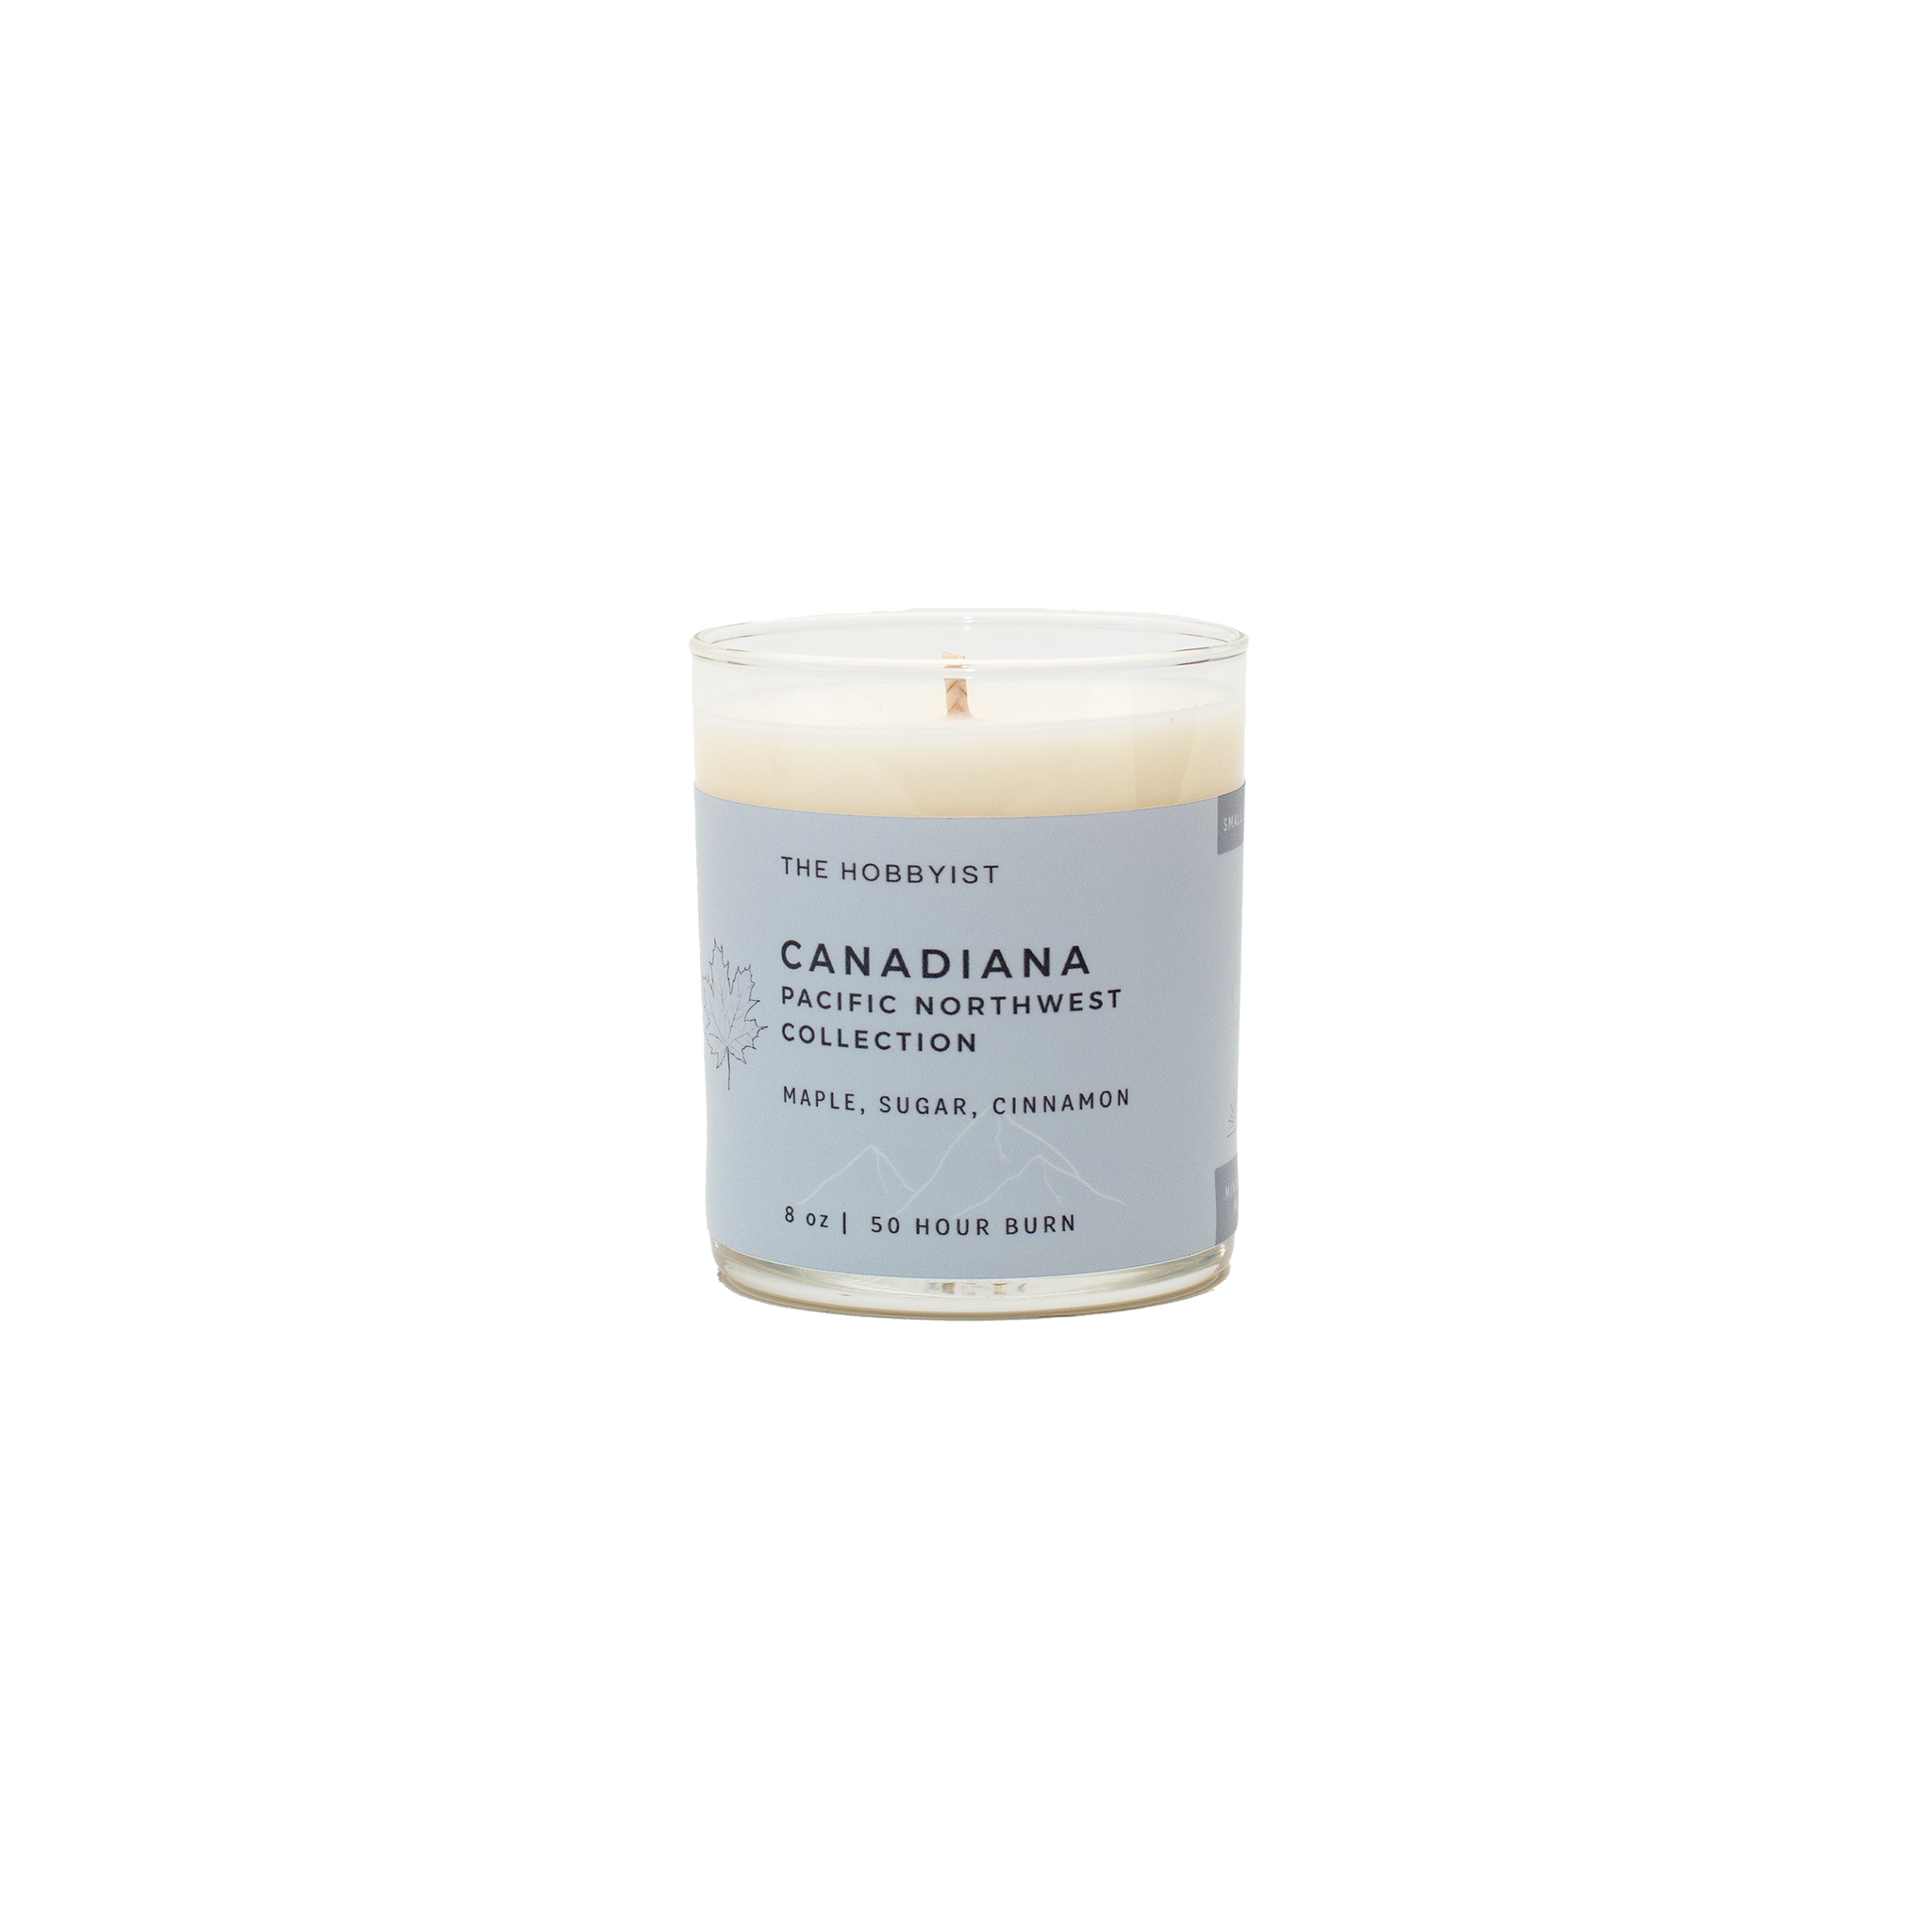 Product photo of the Canadiana Candle from our Pacific North-West Collection